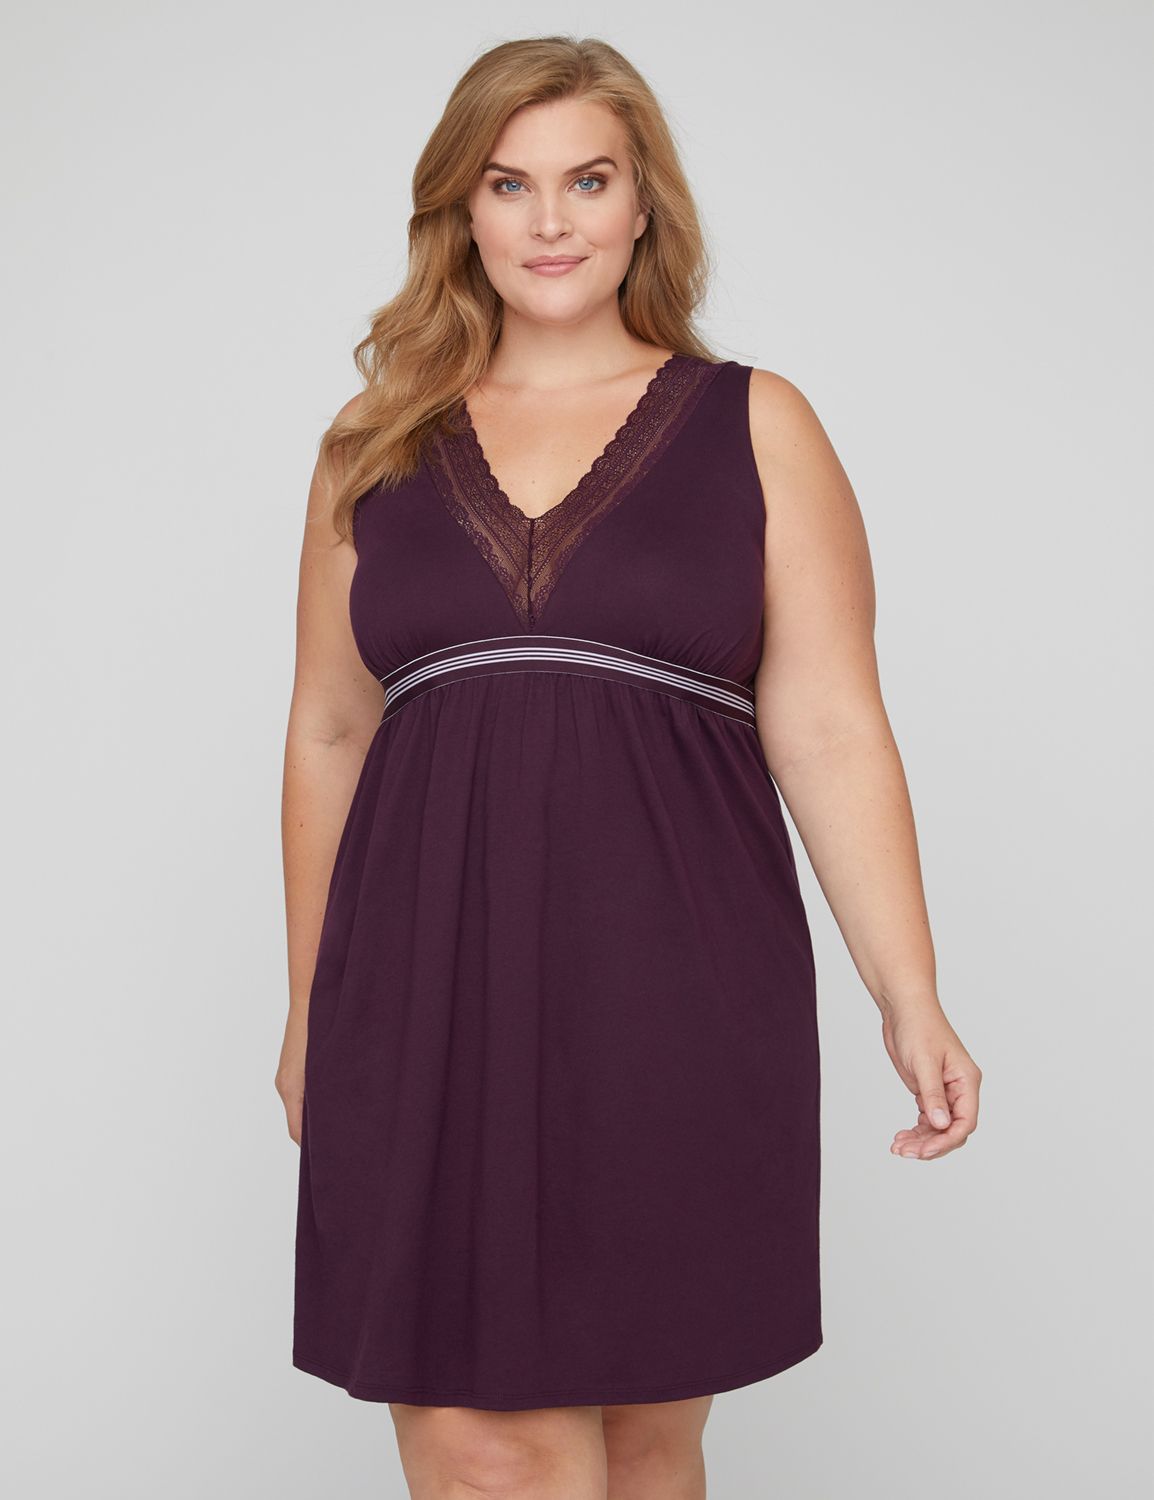 Drift off in this soft, jersey-knit chemise for soft slumber night after night. Empire waist silhouette with a striped elastic band. Deep V-neck outlined in lace. Sleeveless. Item Number #315080, 100% Cotton, Machine Wash, Imported Plus Size Sleepwear, Length: 22" , Plus Sizes 0X-5X, Catherines Plus Sizes